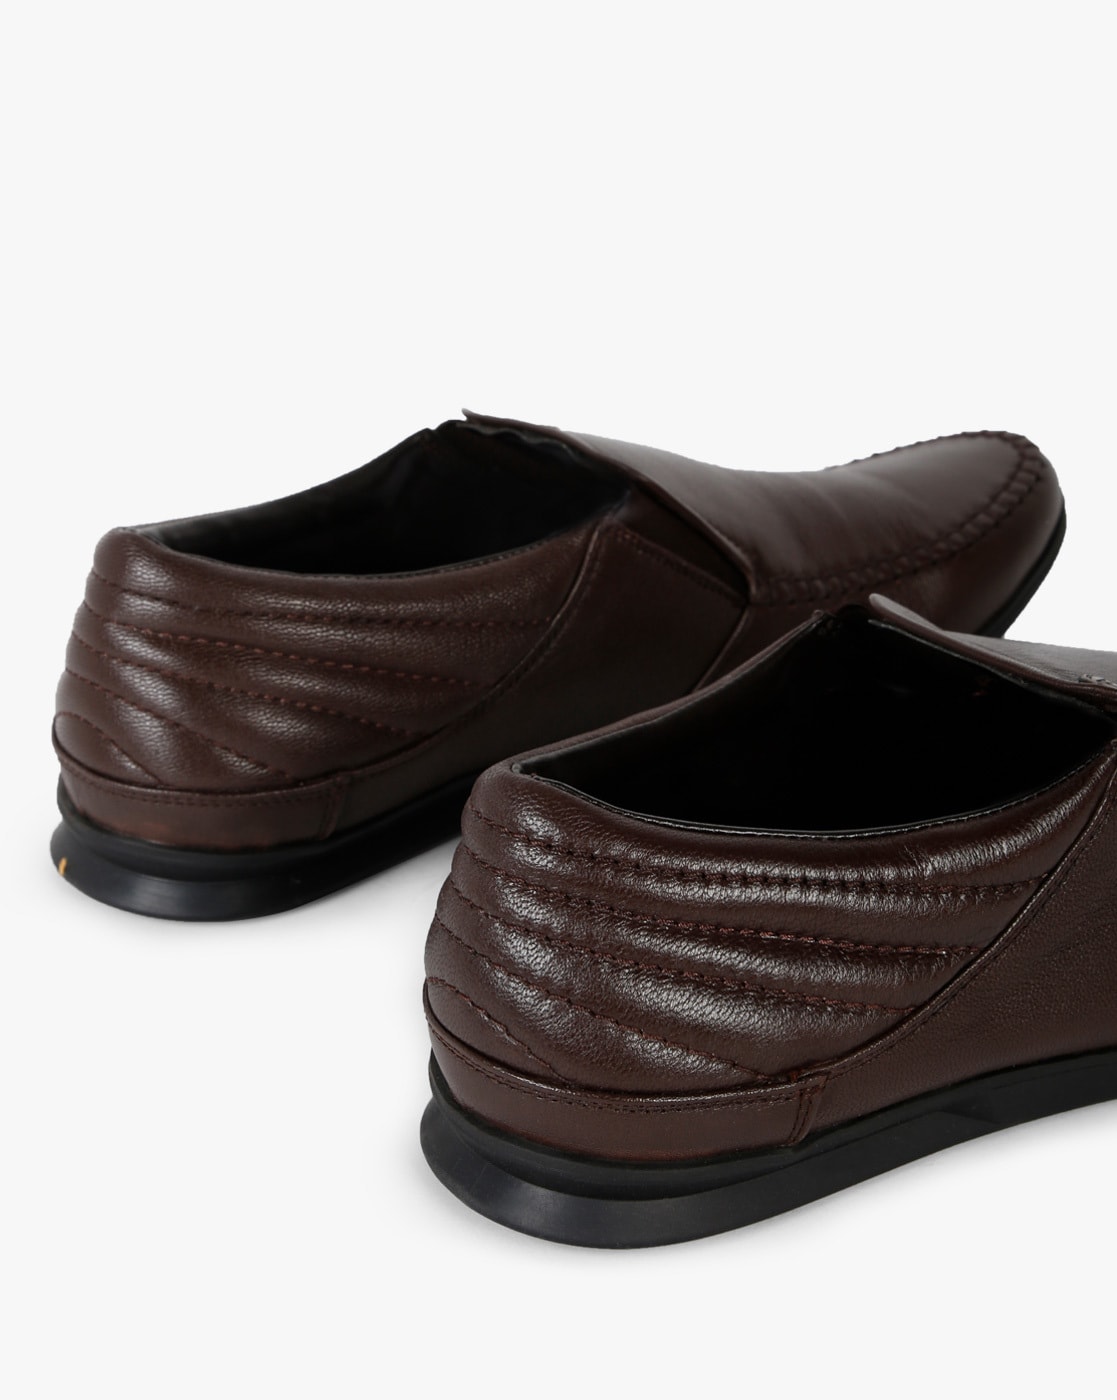 Buy Brown Formal Shoes for Men by 